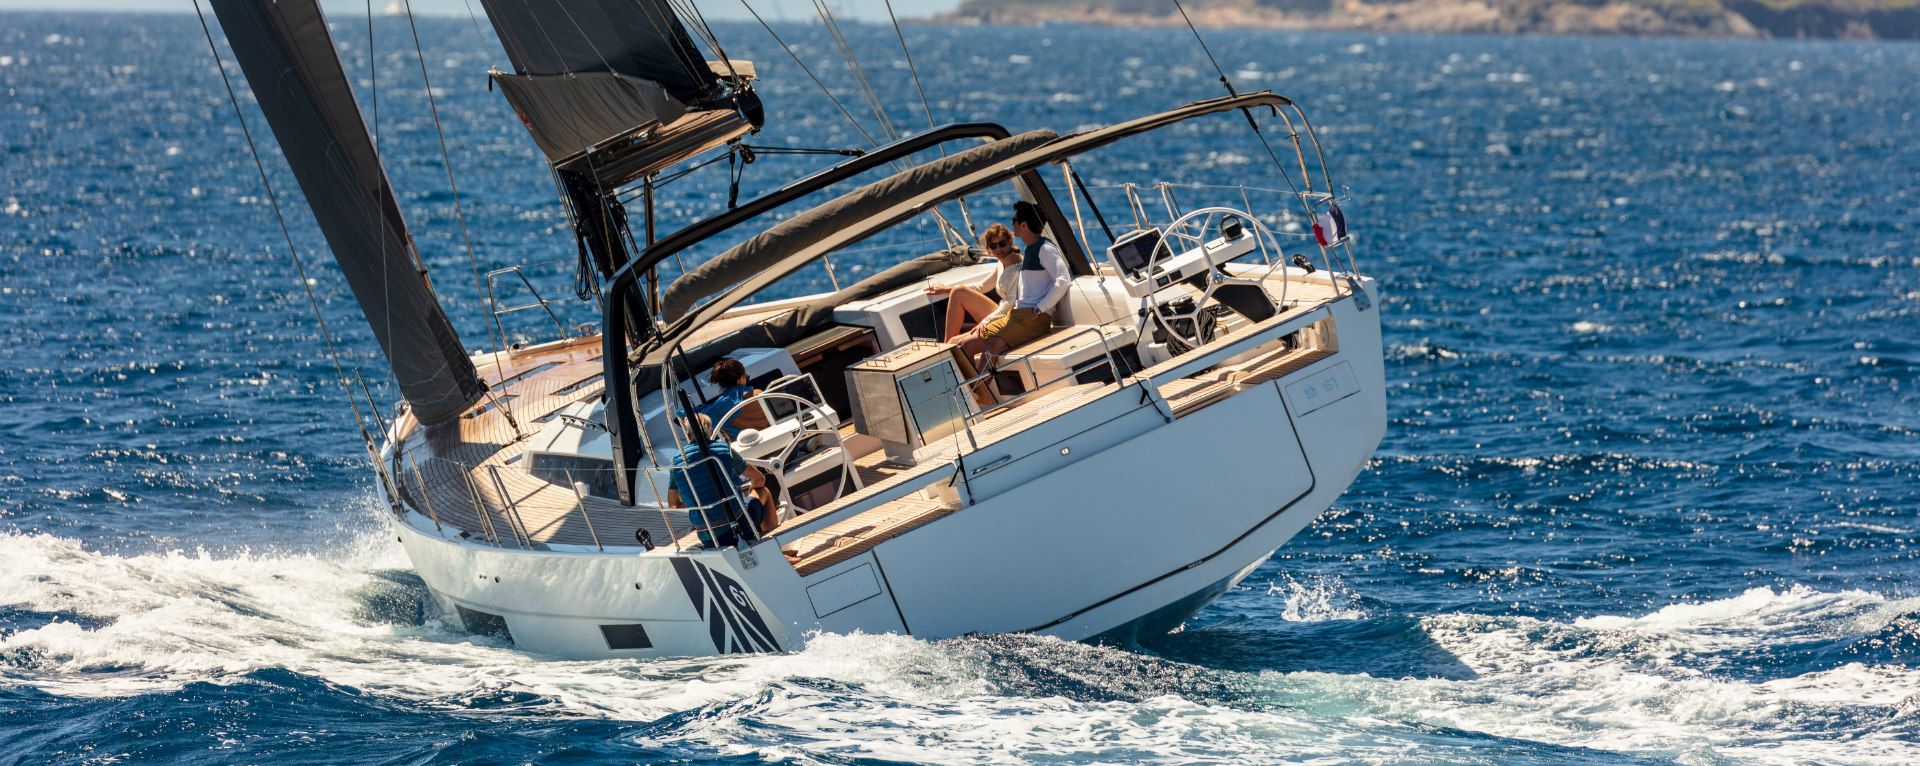 Dufour's Flagship Yacht incomparable sailing